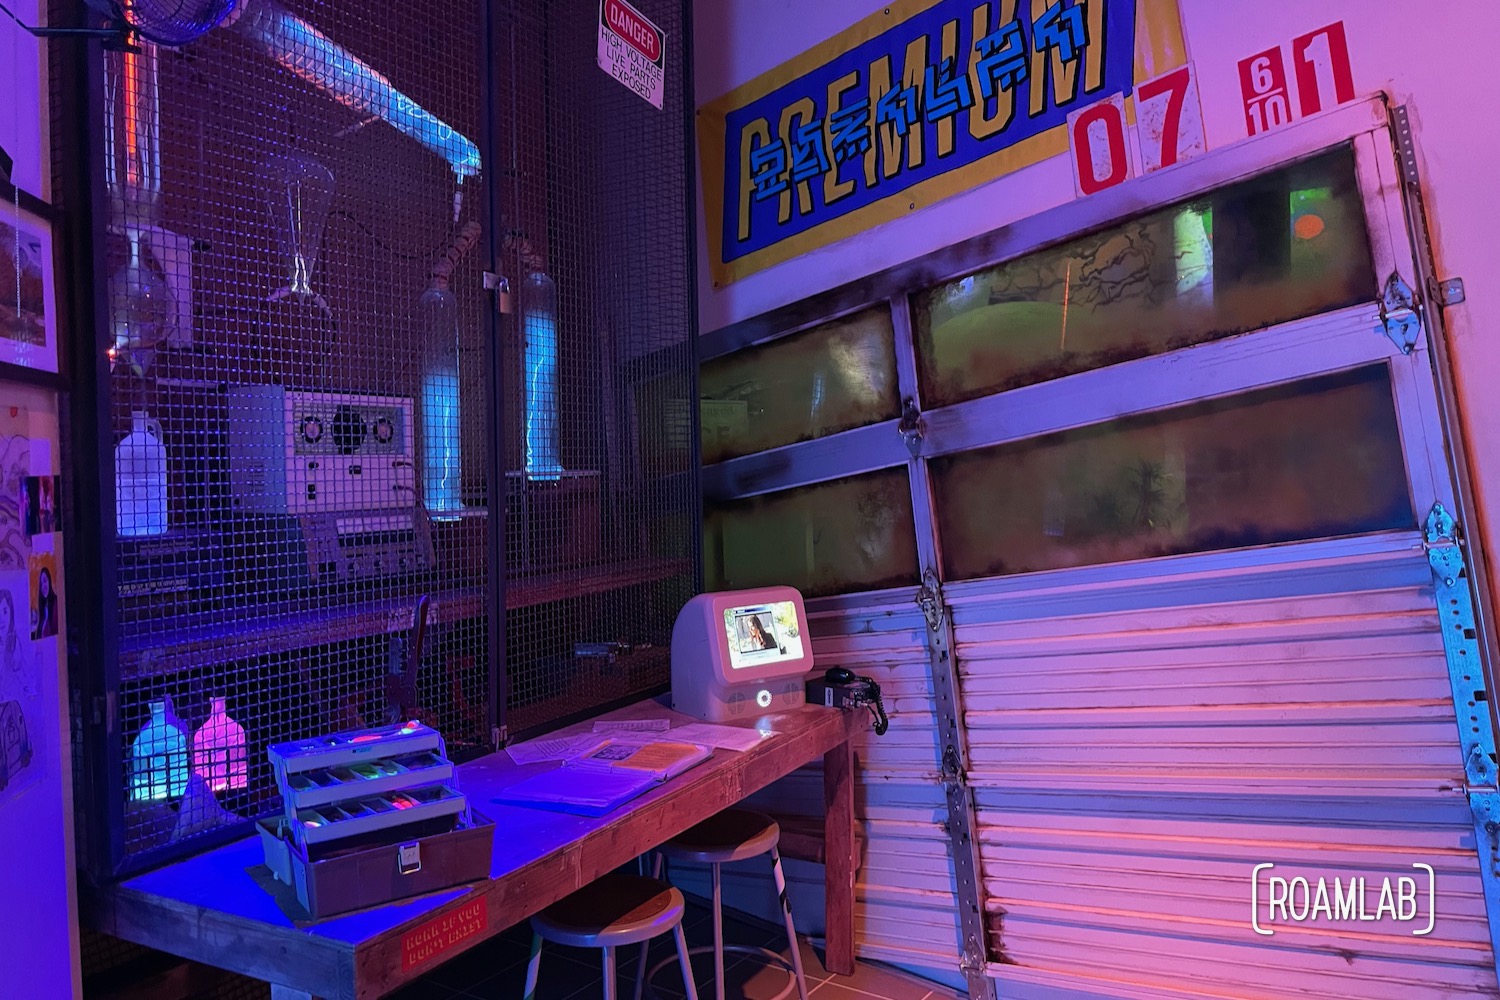 Garage work area in Meow Wolf's Omega Mart.